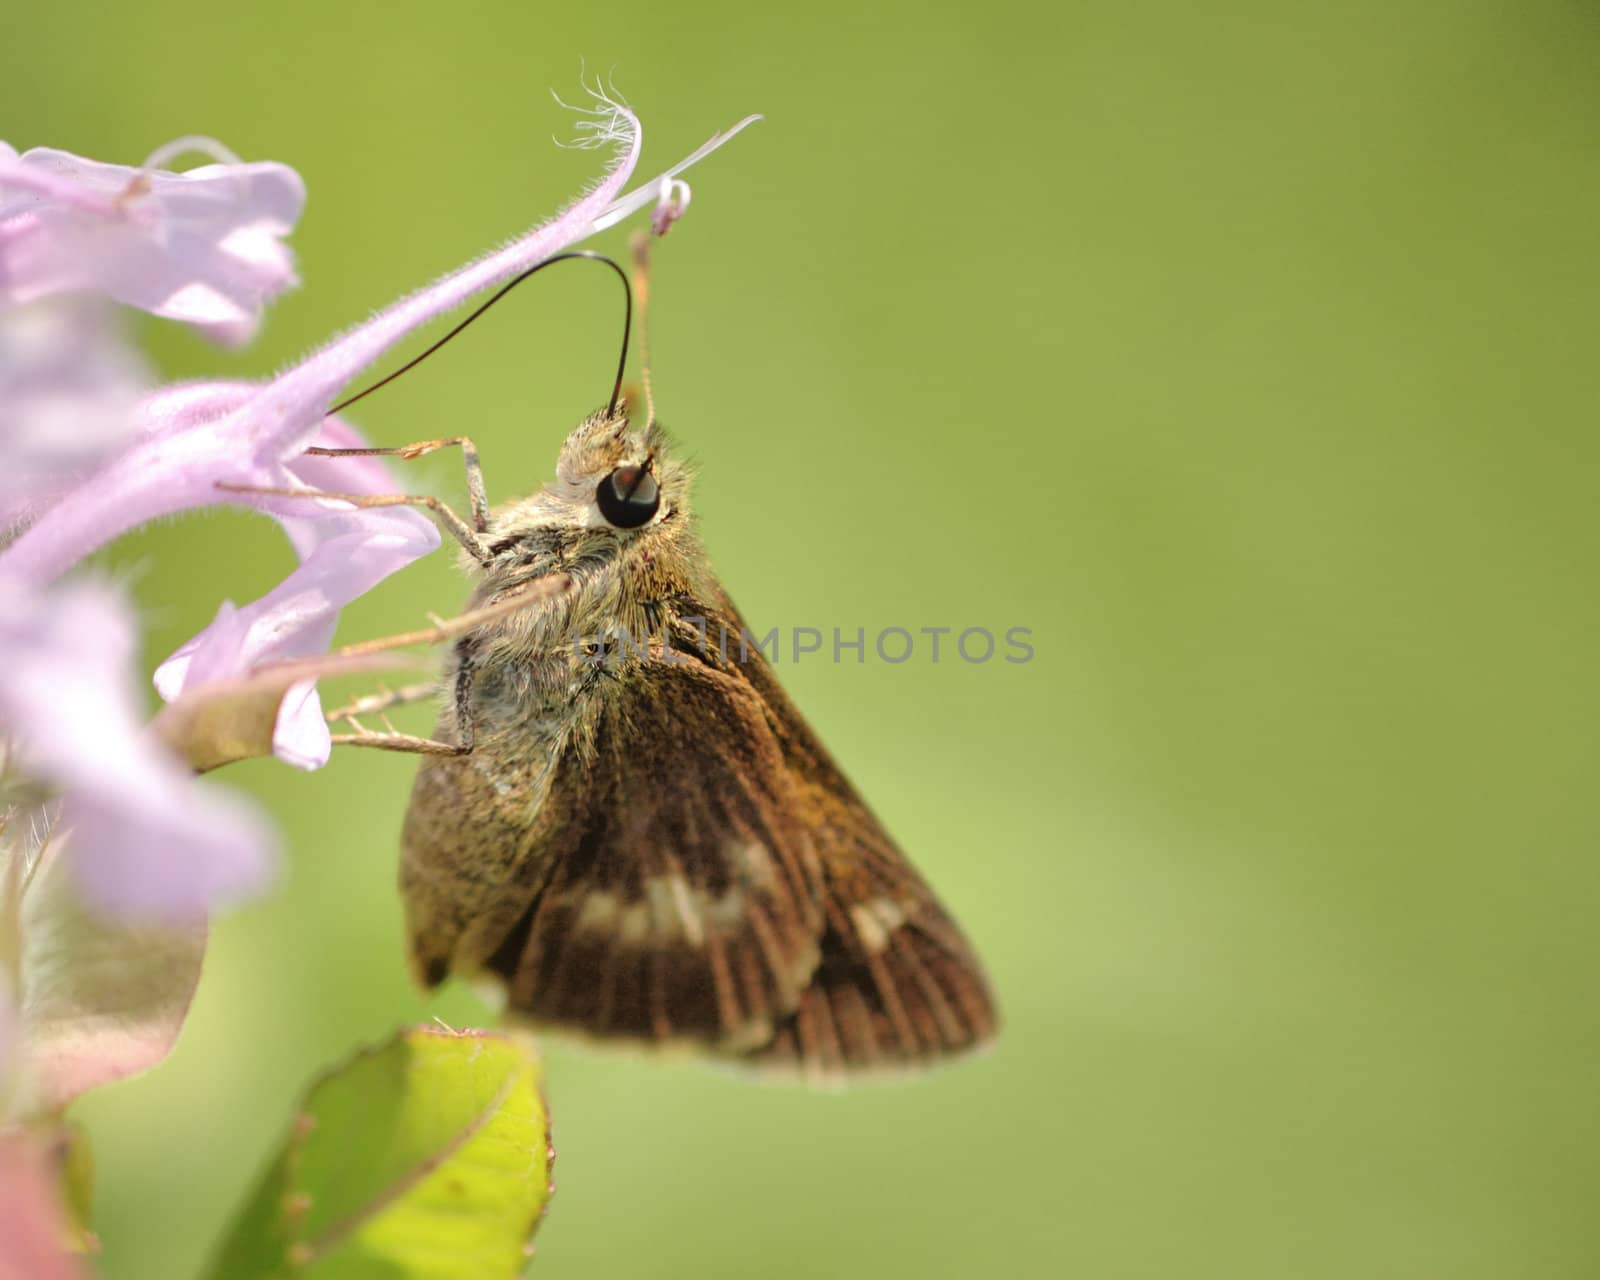 A skipper butterfly perched on a flower collecting pollen.